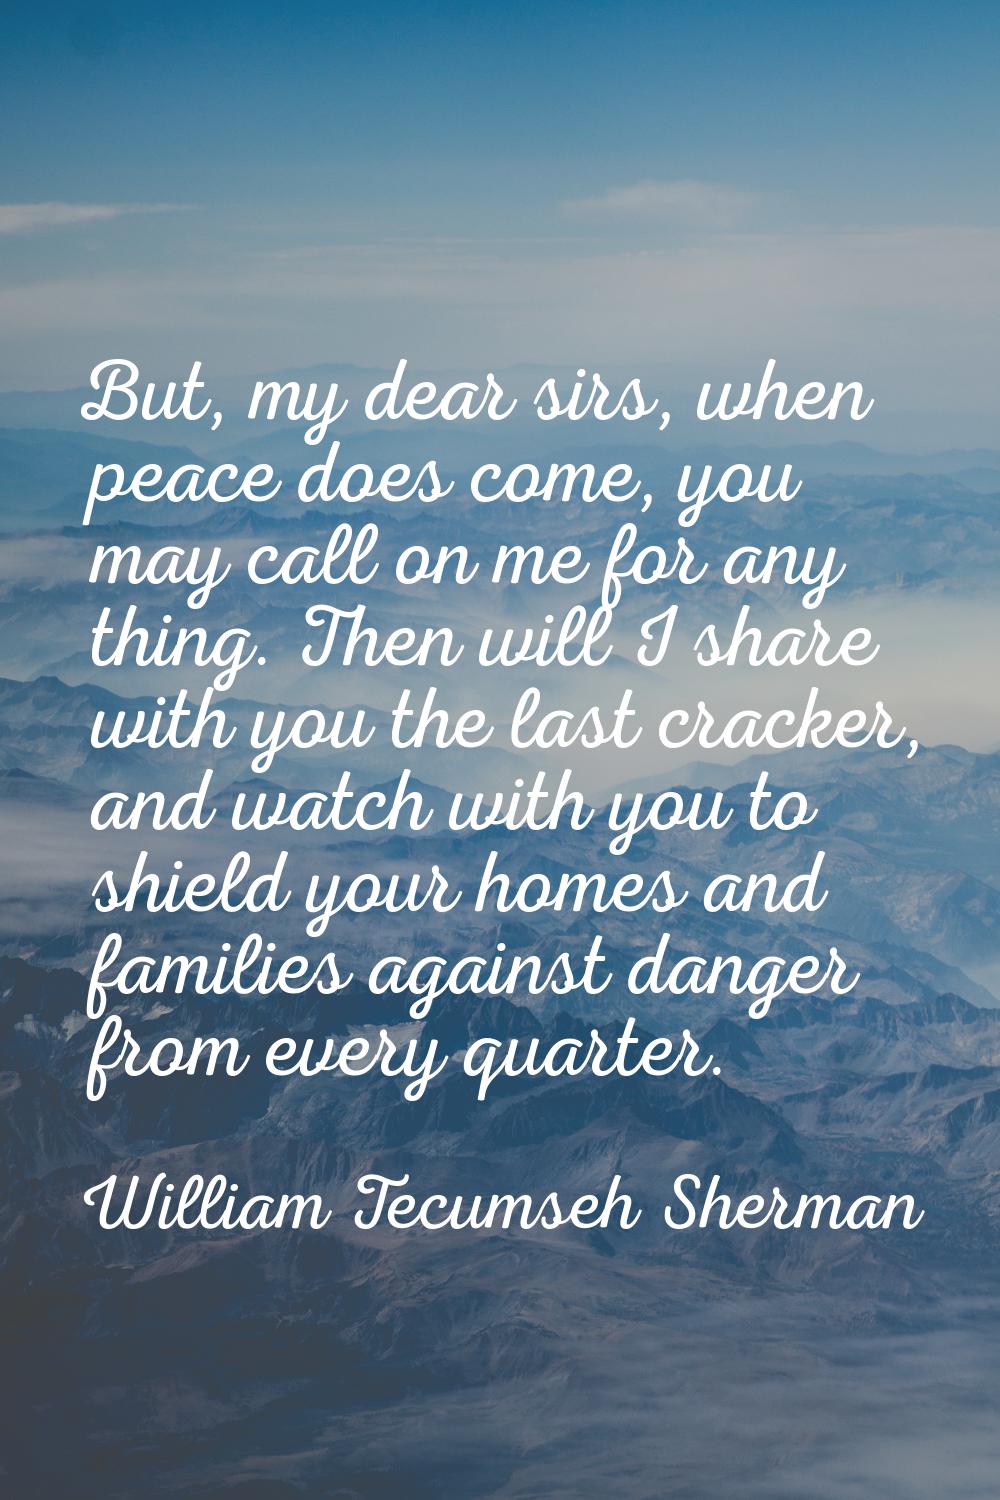 But, my dear sirs, when peace does come, you may call on me for any thing. Then will I share with y